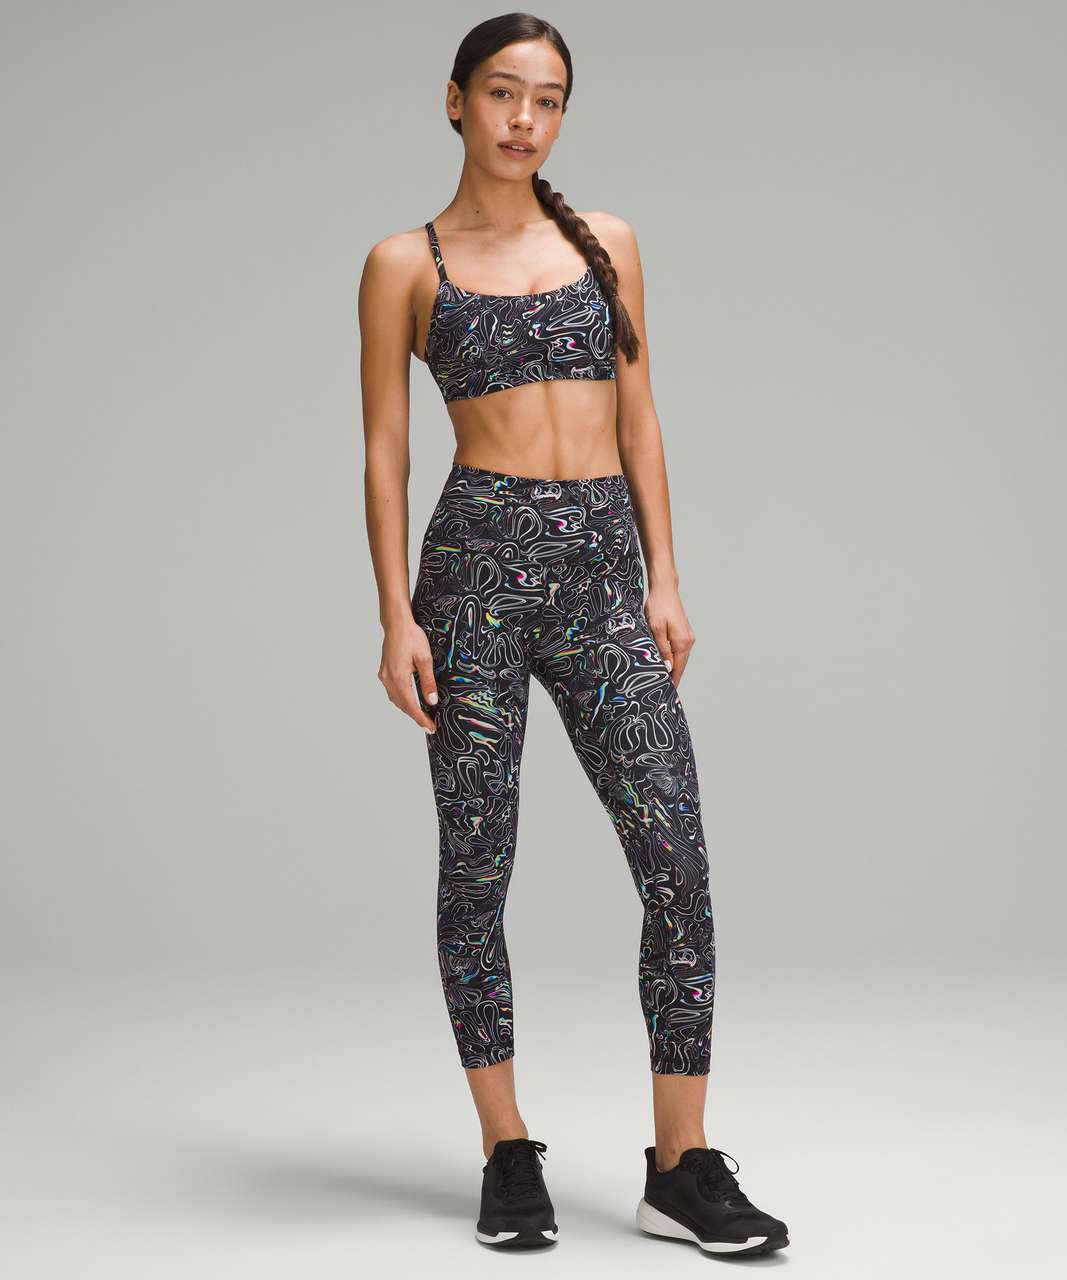 Lululemon Wunder Train Strappy Racer Bra *Light Support, C/D Cup - Daisyfied Yogo Moonbow Black